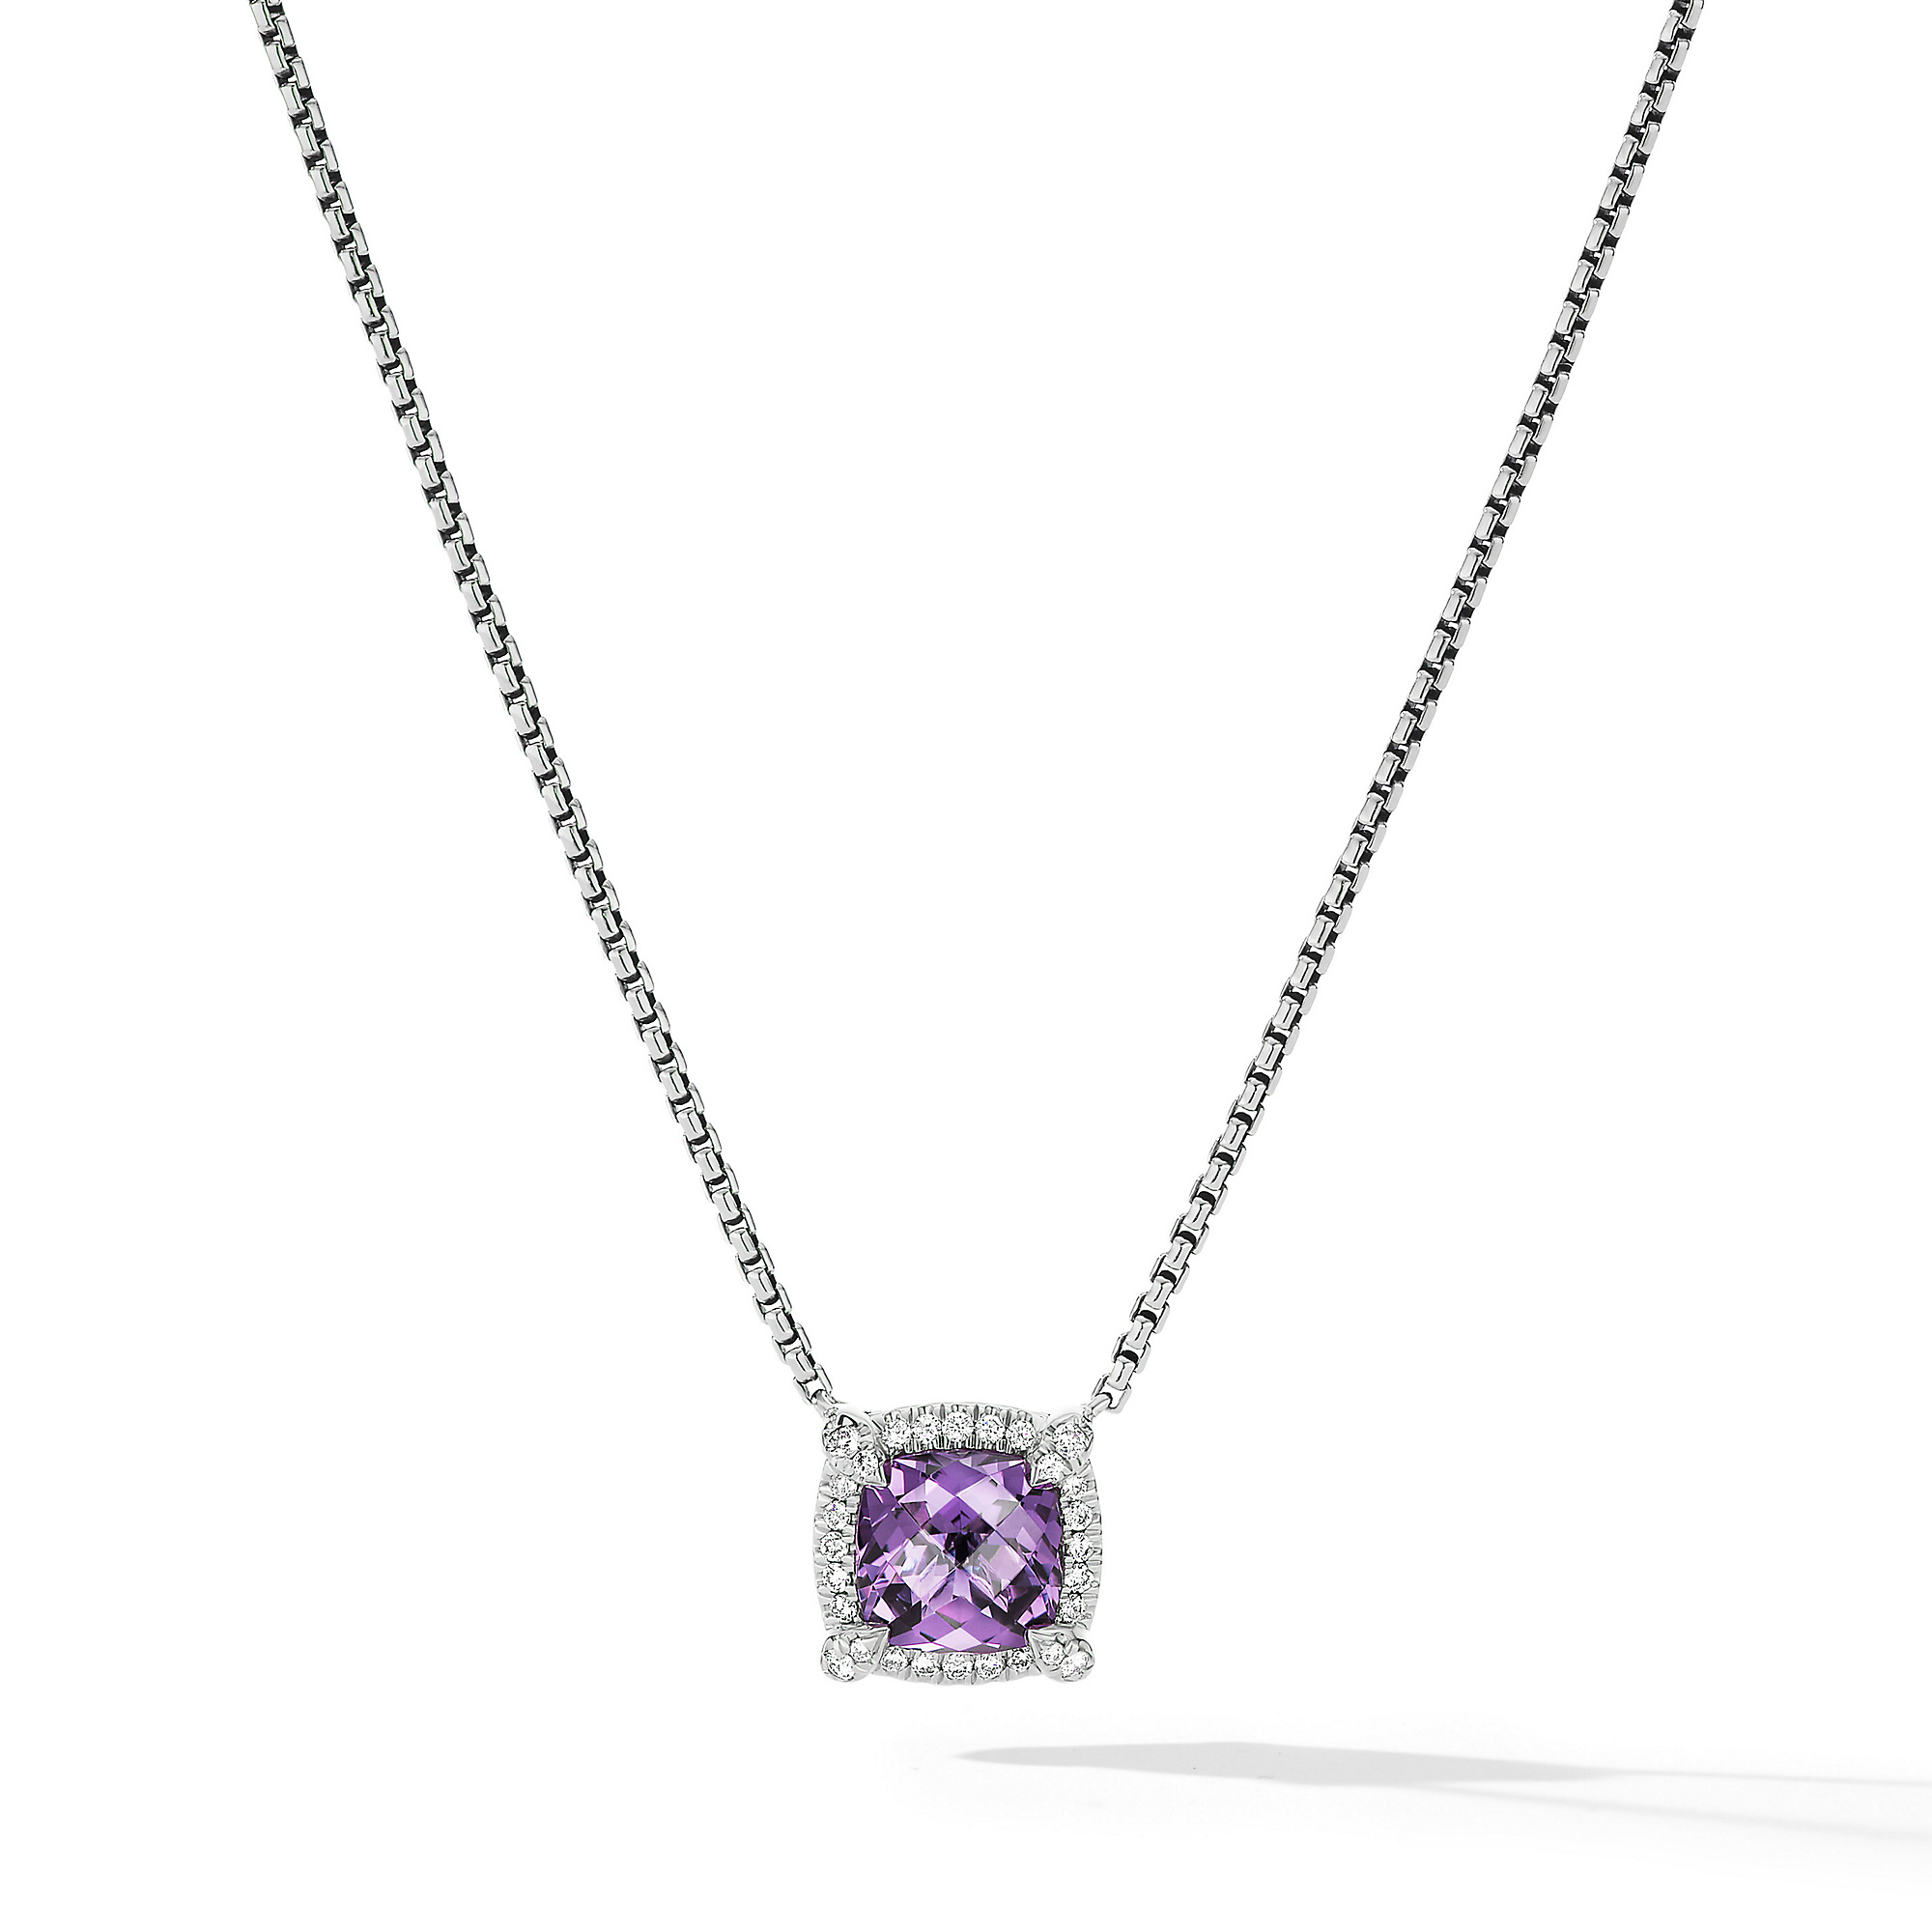 Petite Chatelaine® Pave Bezel Pendant Necklace with Amethyst and Diamonds